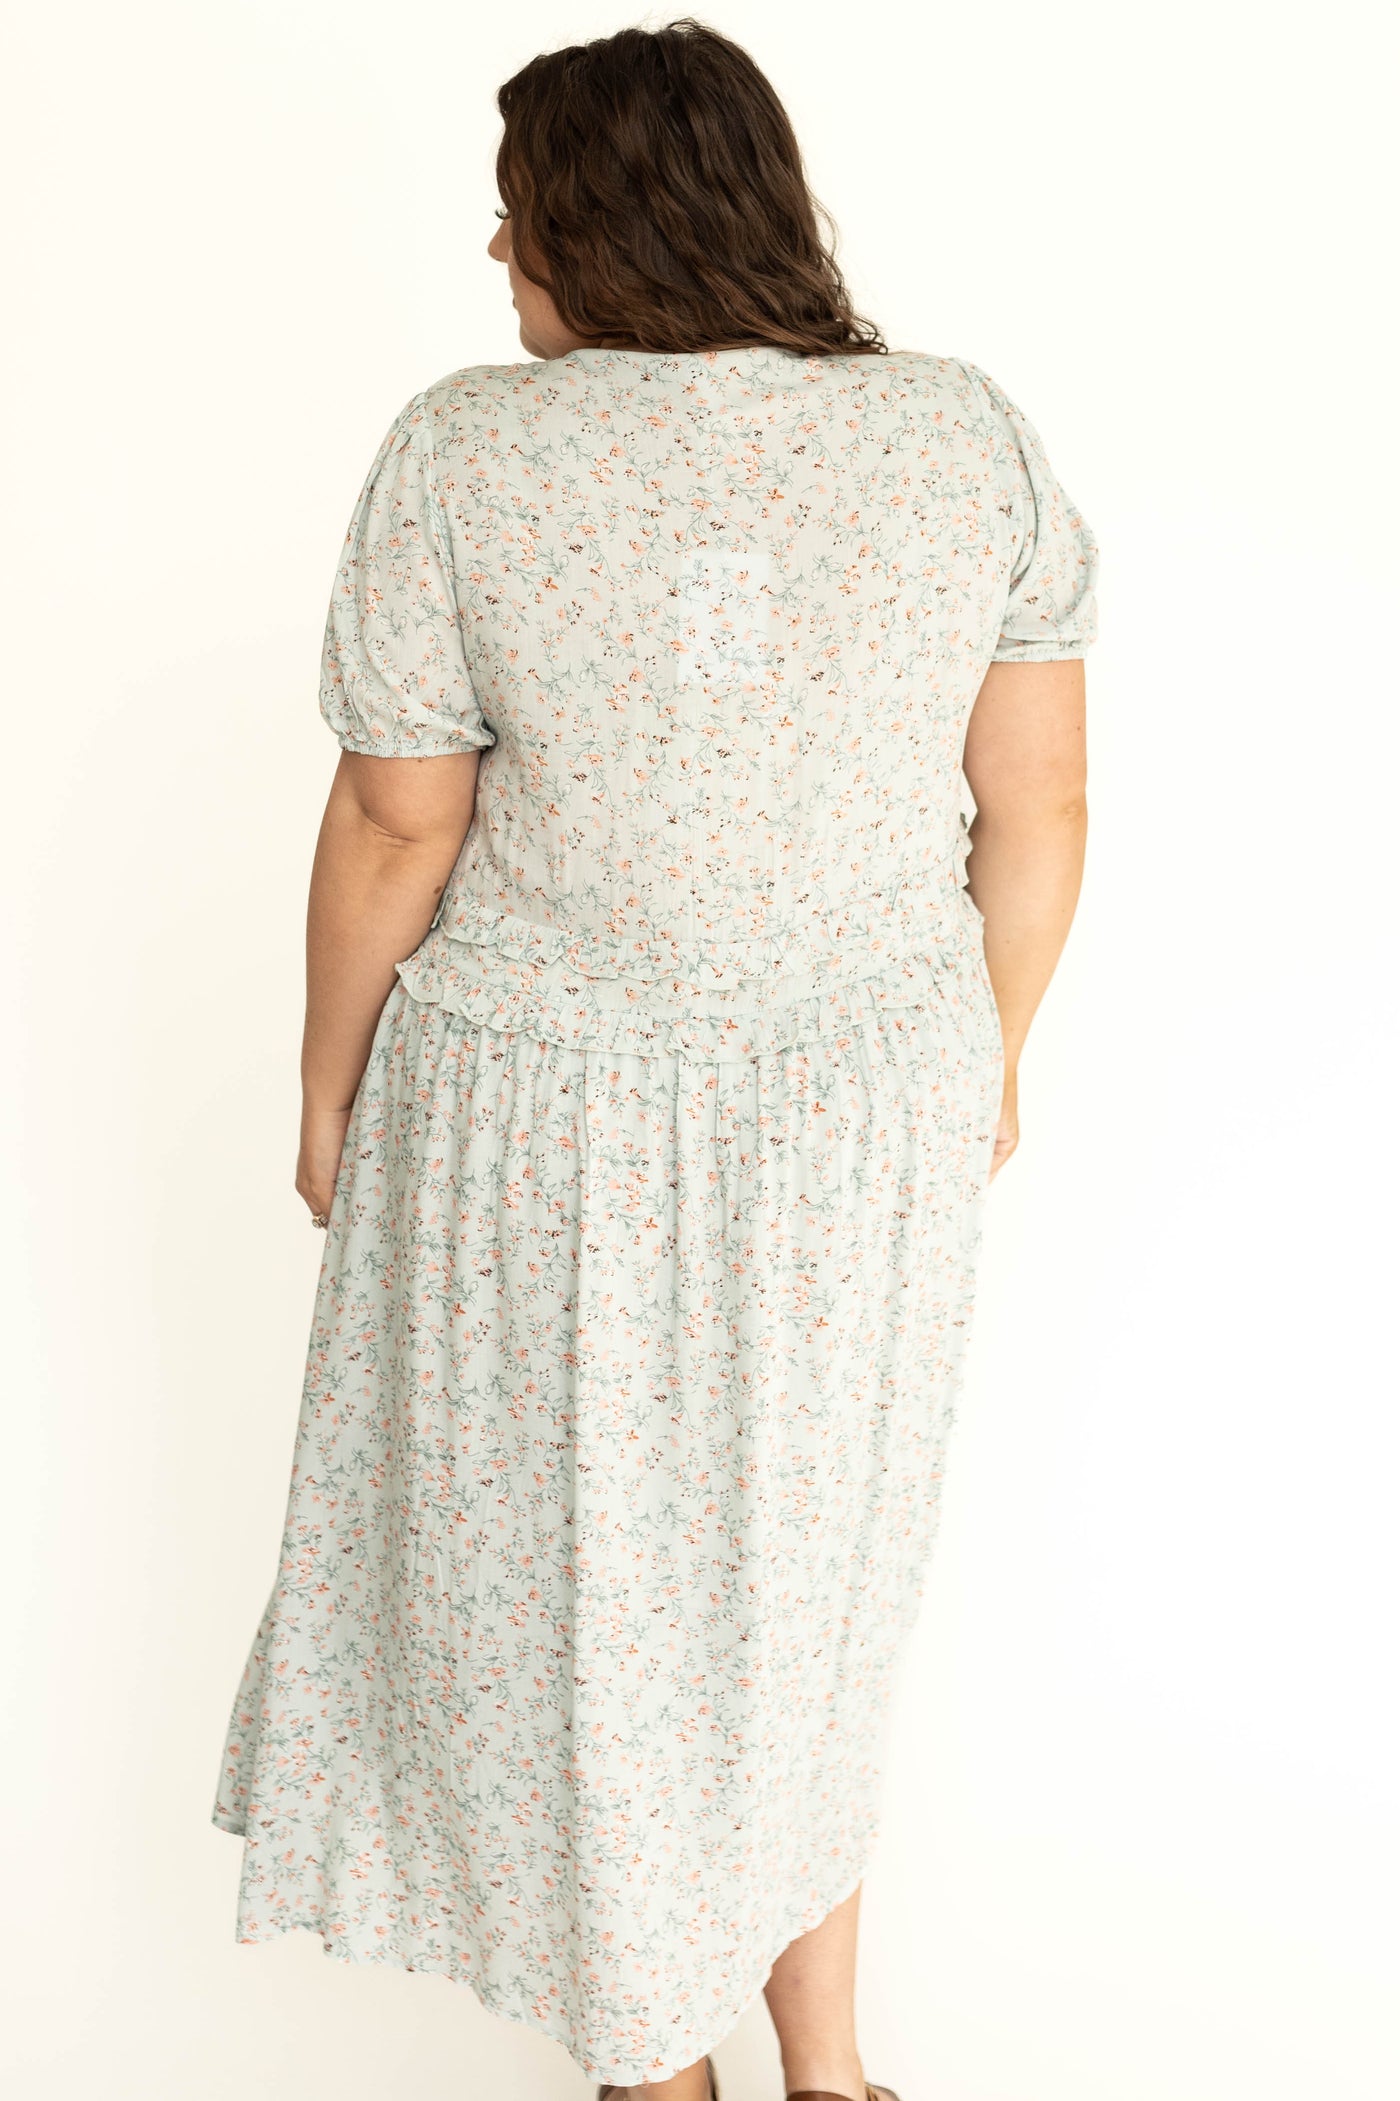 Plus size light seafoam floral dress with short sleeves